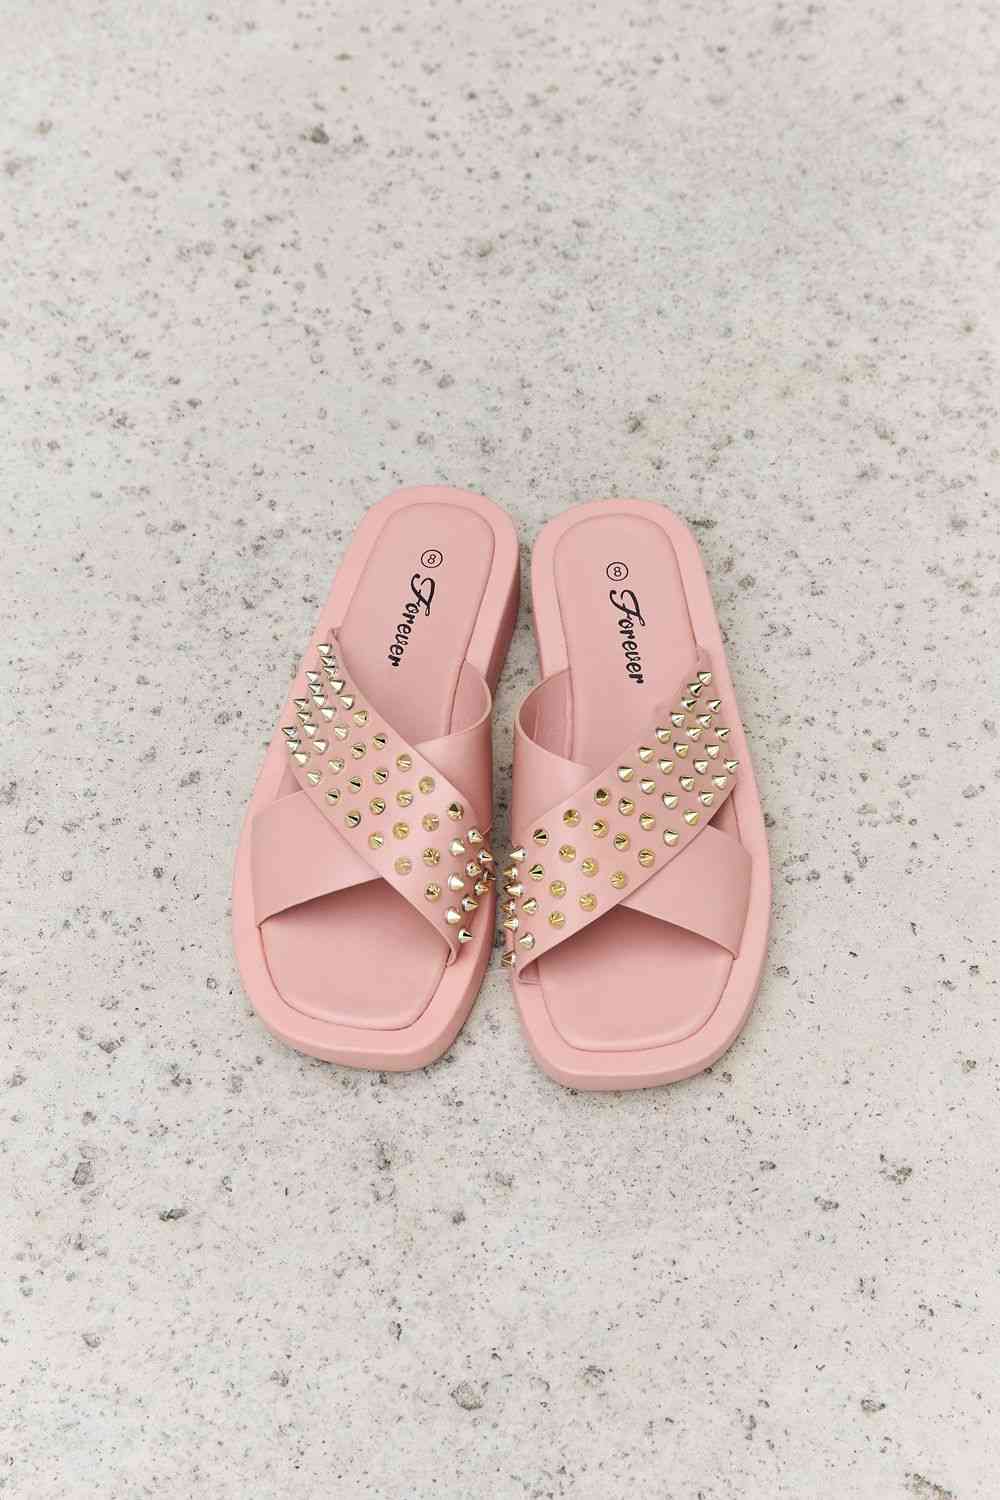 Studded Cross Strap Sandals in Blush - Accessories - Shoes - 6 - 2024